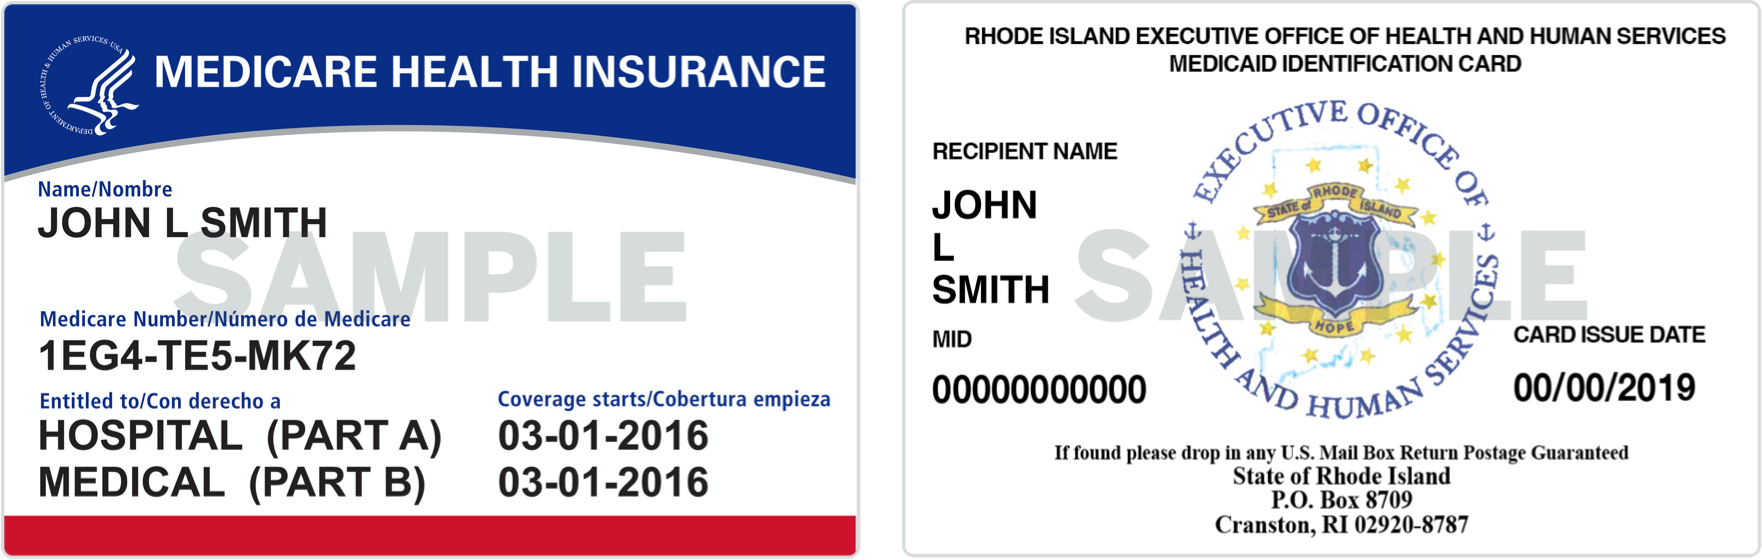 Medicare and BlueRI for Duals member cards